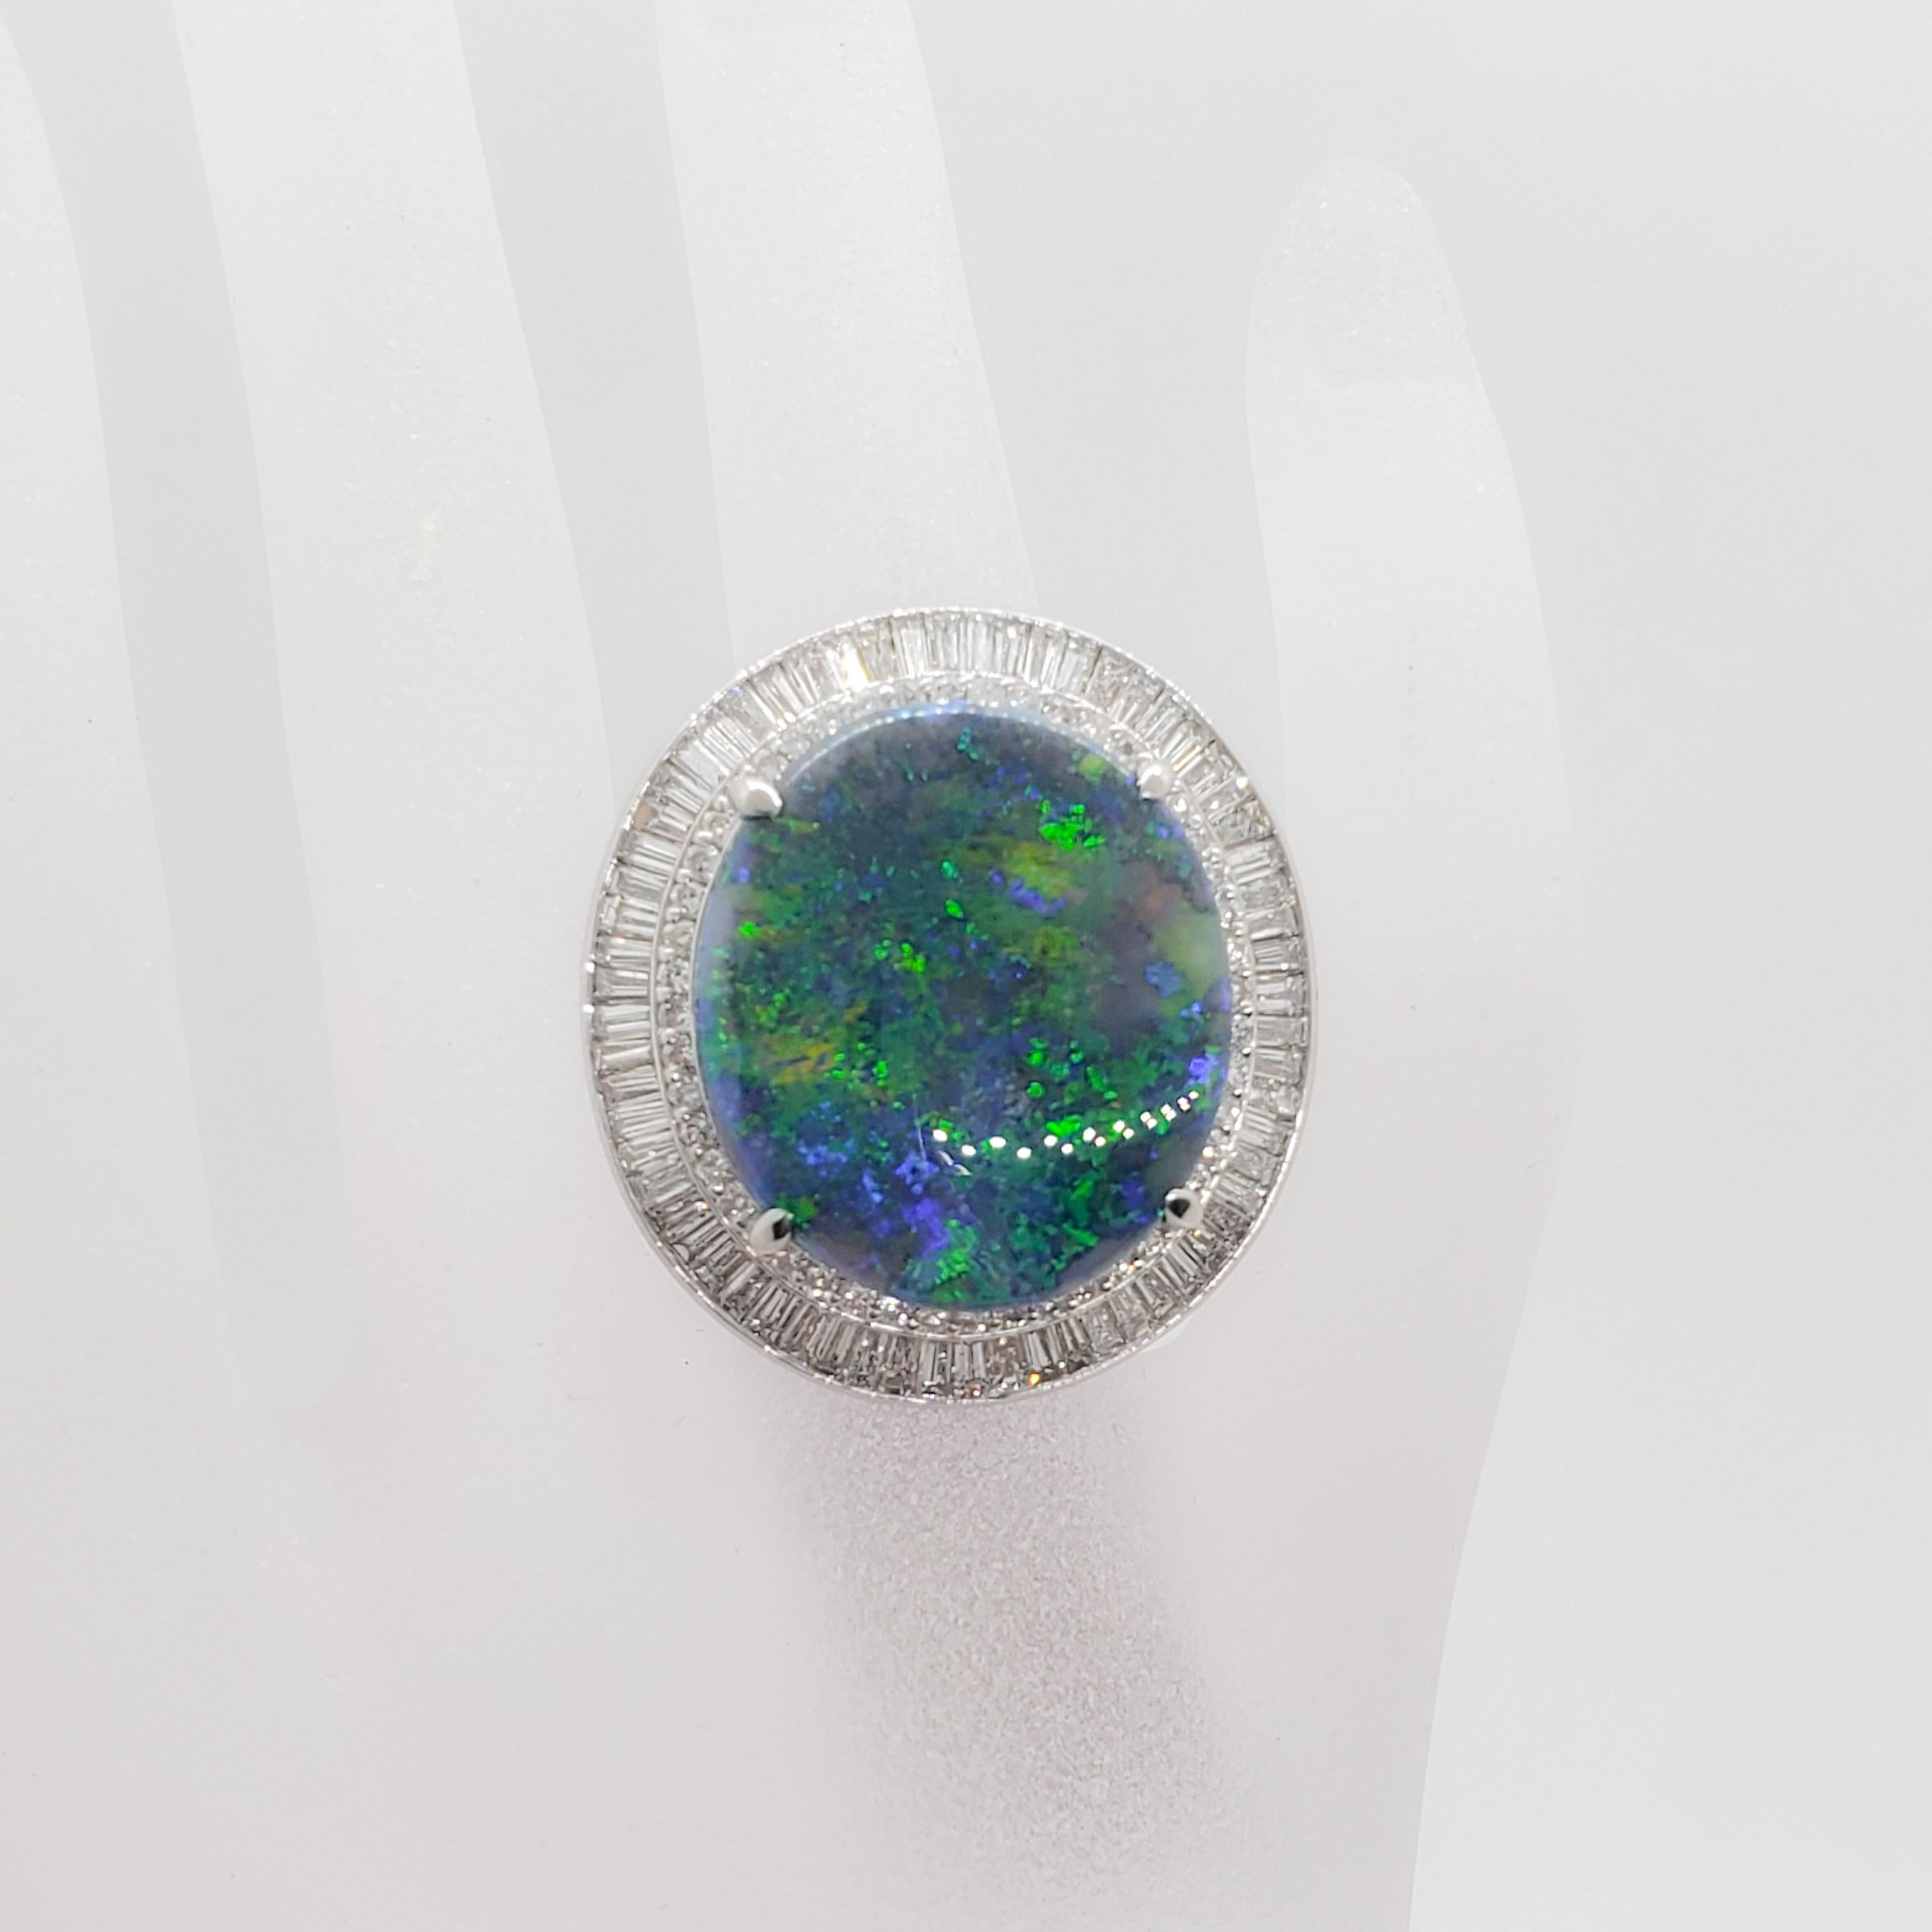 This estate black opal oval ring is stunning!  Showcasing a 15.49 ct black opal oval with gorgeous greens and blues along with 3.56 cts of good quality, white, and bright diamond rounds and baguettes.  Handmade mounting in platinum size 6.25. 